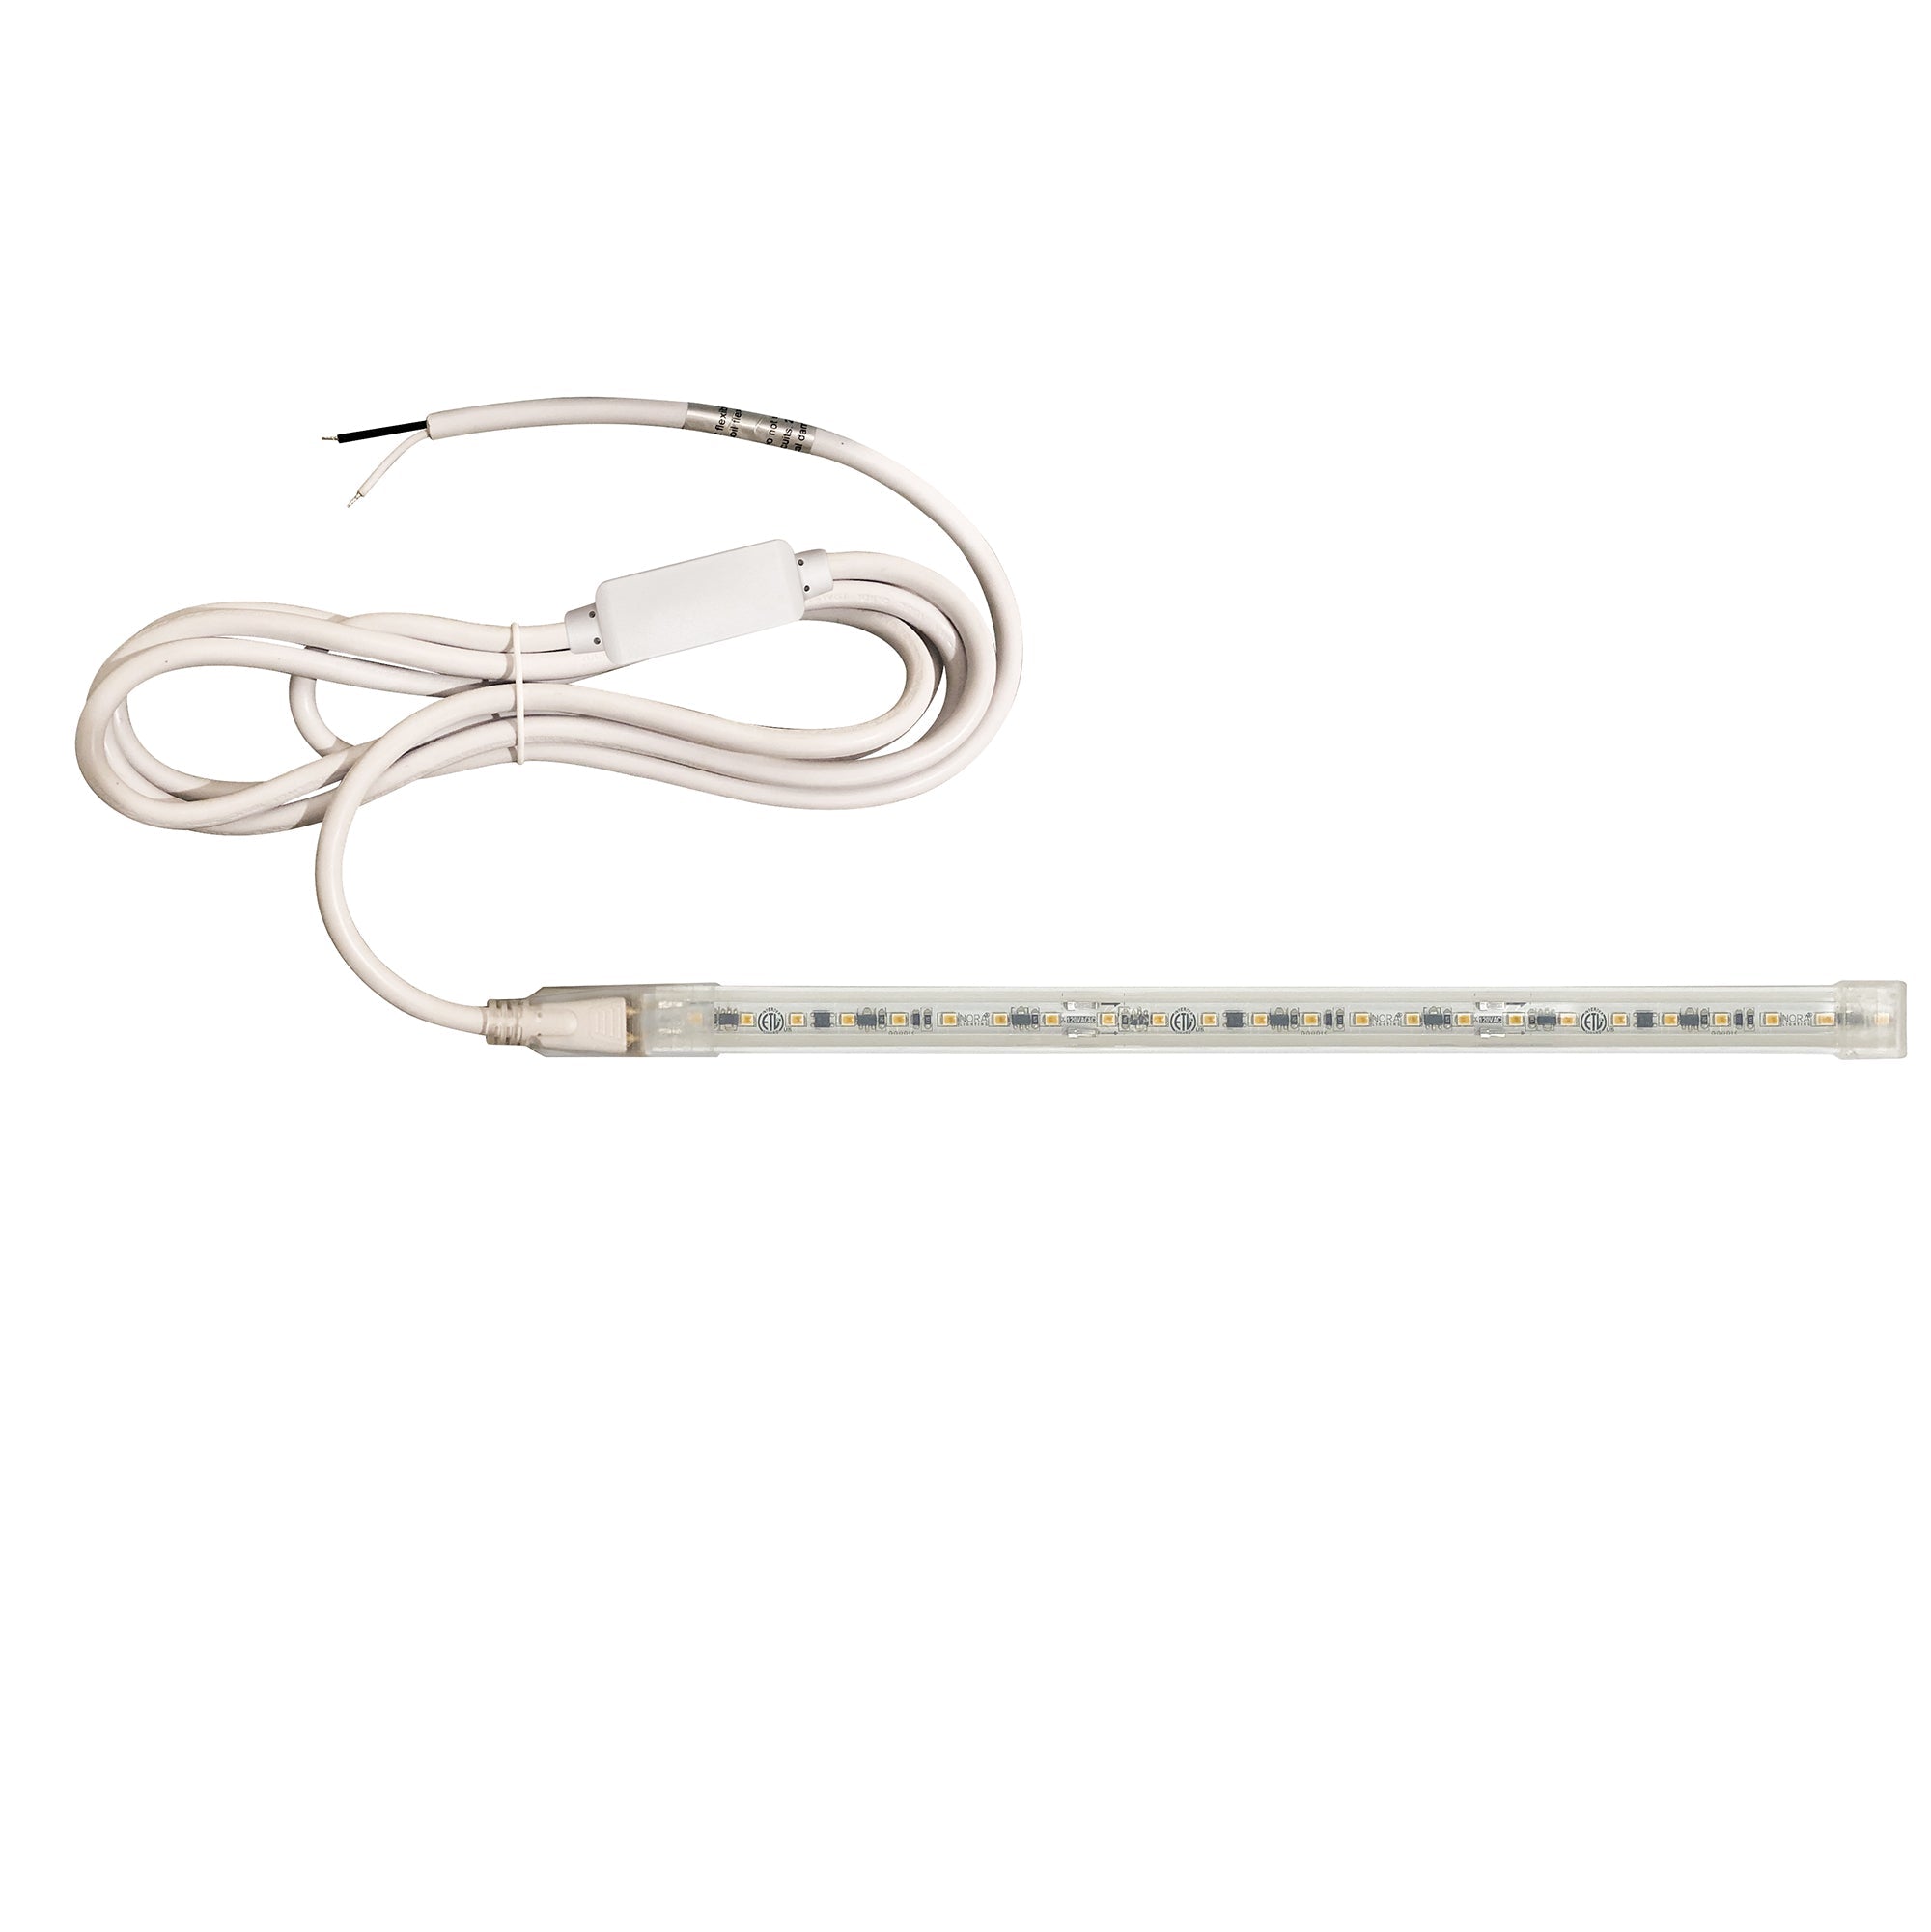 Nora Lighting NUTP13-W83-12-940/HWSP - Accent / Undercabinet - Custom Cut 83-ft 120V Continuous LED Tape Light, 330lm / 3.6W per foot, 4000K, w/ Mounting Clips and 8' Hardwired Power Cord w/ Surge Protector